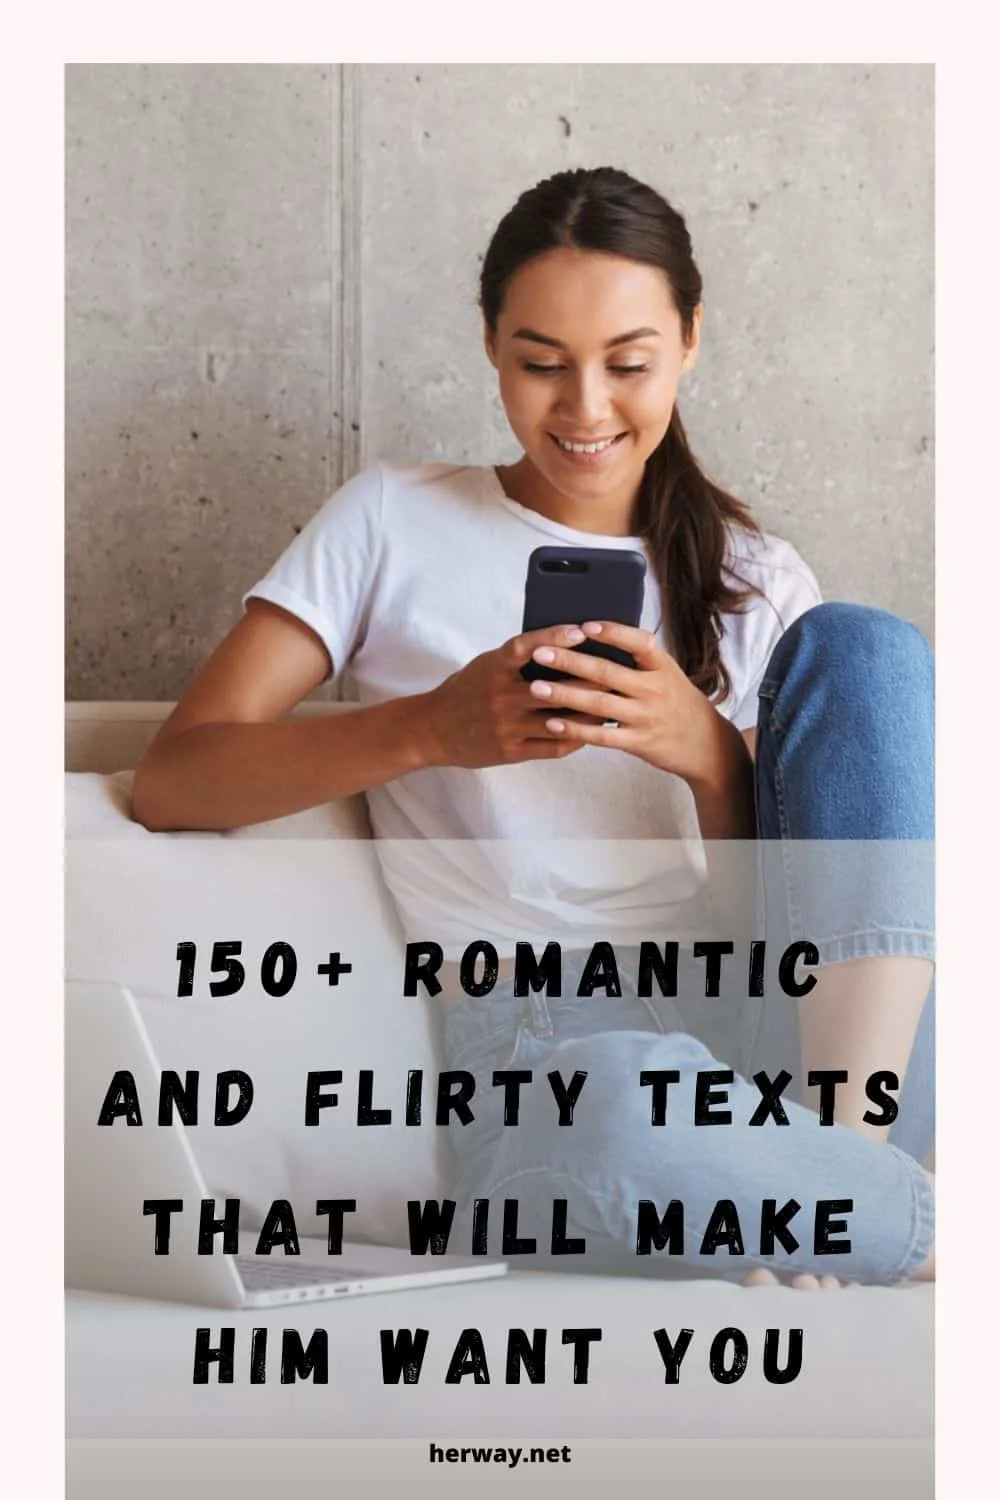 What to say to seduce a man over text